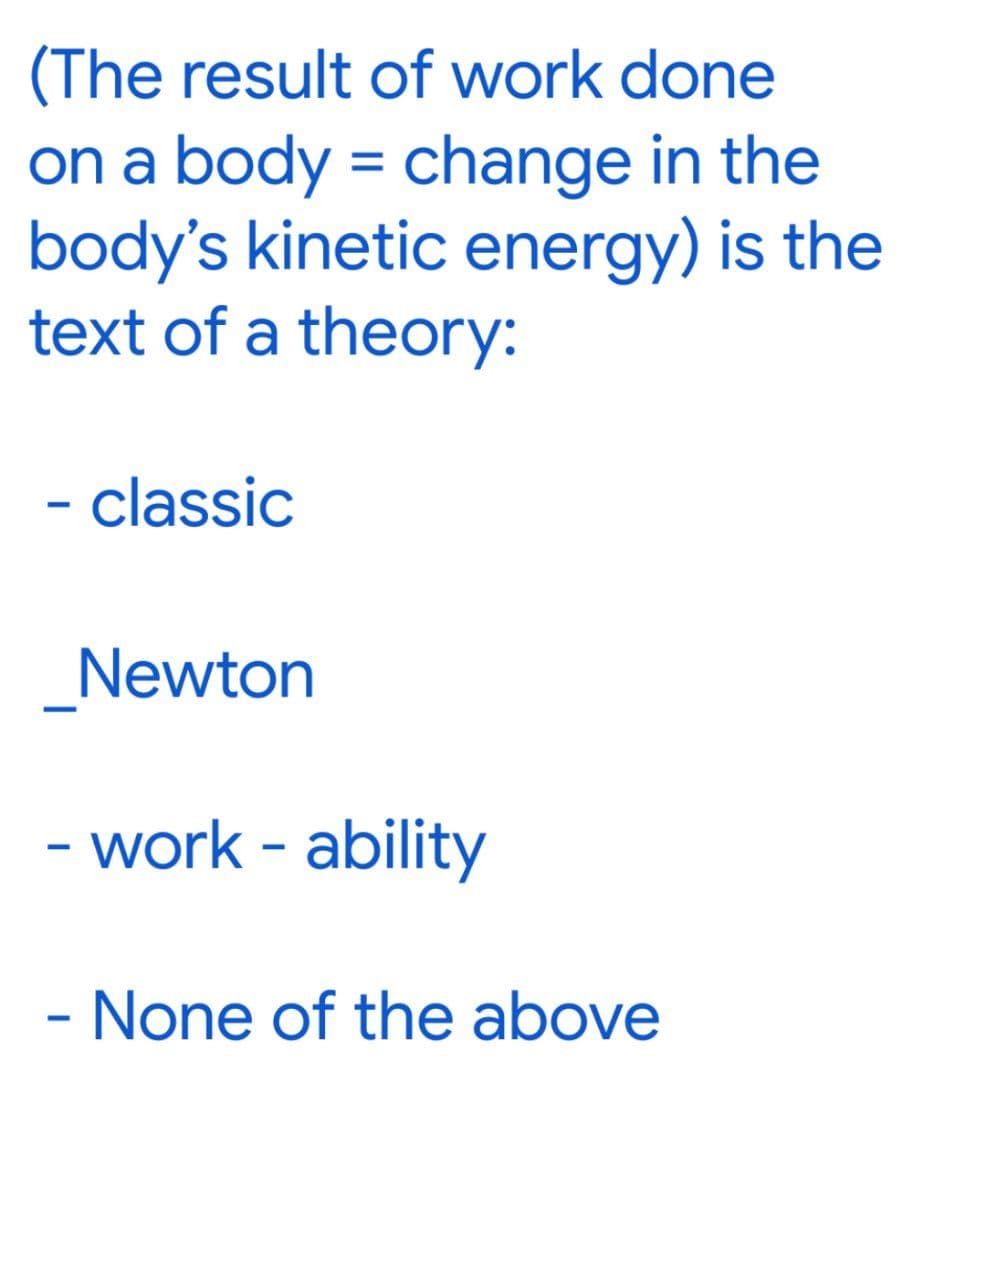 (The result of work done
on a body = change in the
body's kinetic energy) is the
text of a theory:
- classic
_Newton
- work - ability
None of the above